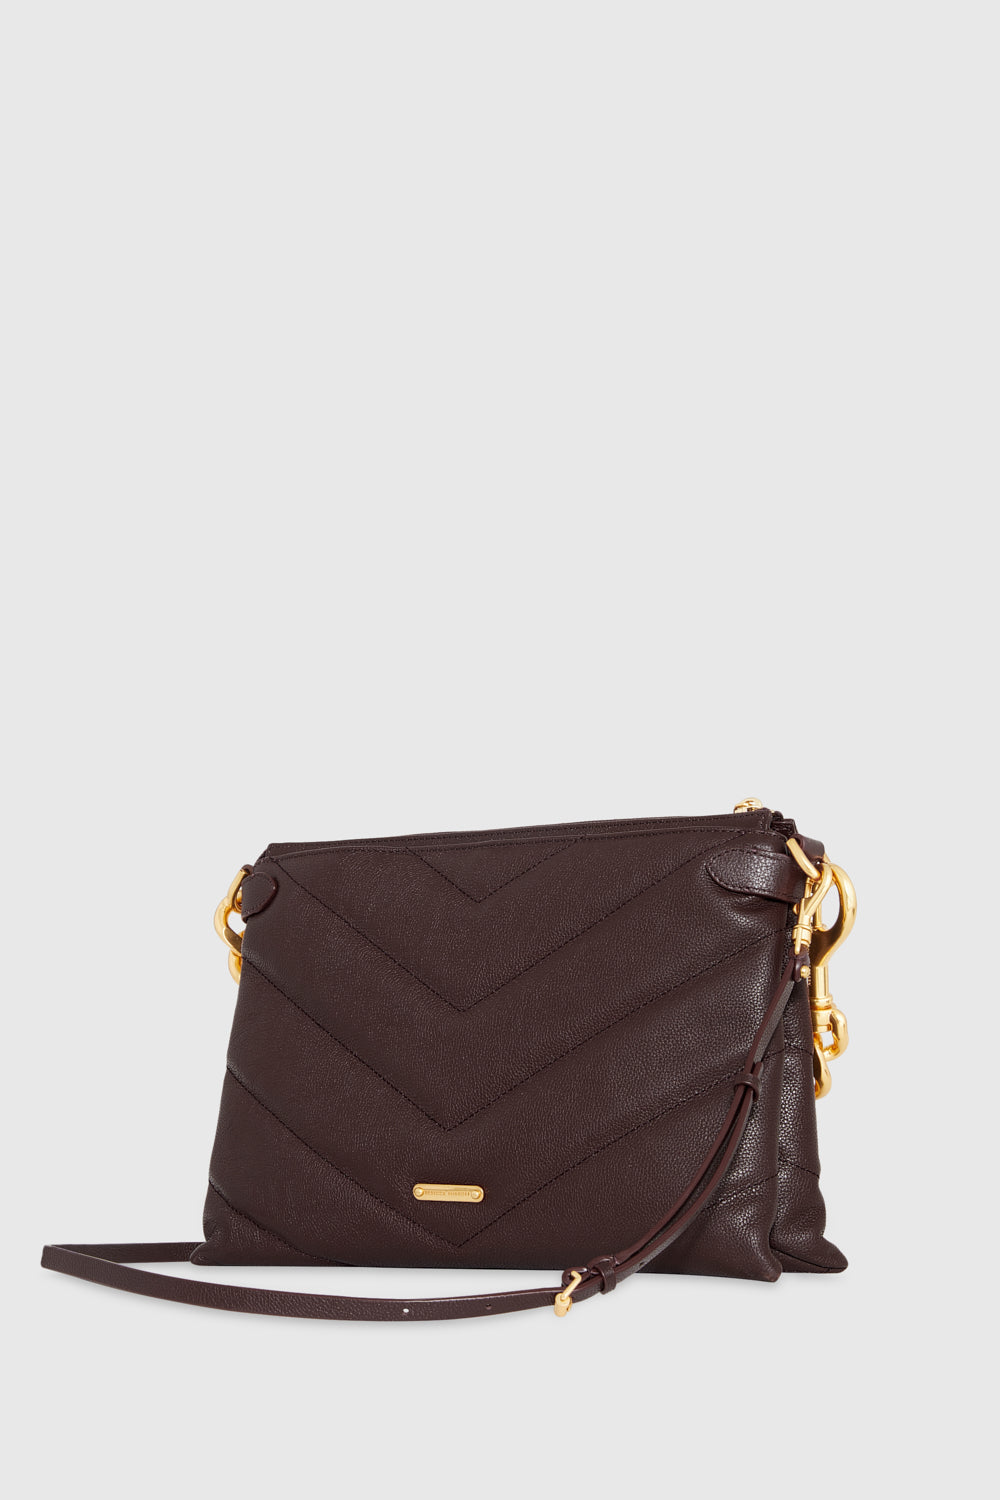 REBECCA MINKOFF Edie Chevron Quilted Leather Maxi Chain Crossbody Bag